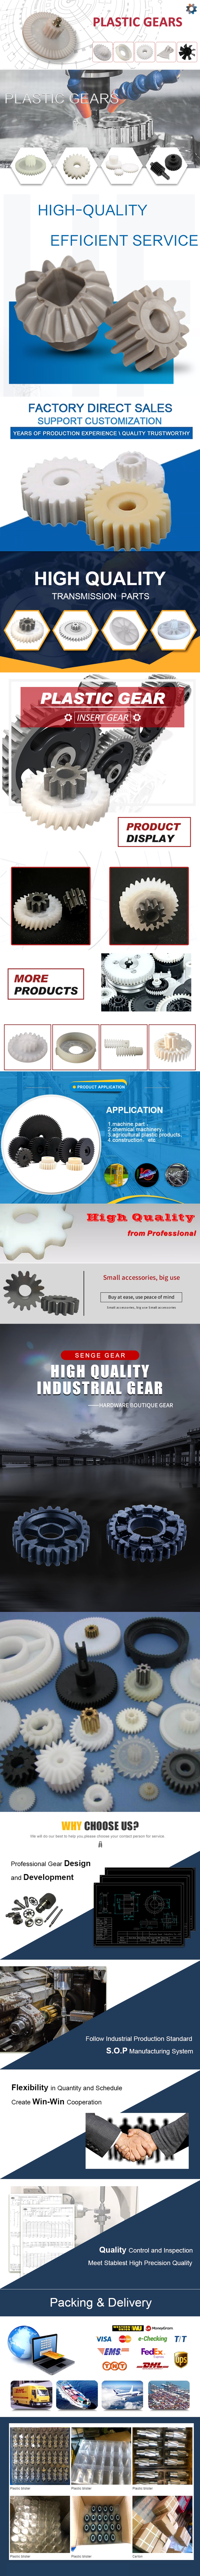   in Brighton United Kingdom  sales   price   shop   near me   near me shop   factory   supplier Continuous Gears Quality Improvements Blacken Steel Chain Wheel Sprocket manufacturer   best   Cost   Custom   Cheap   wholesaler 